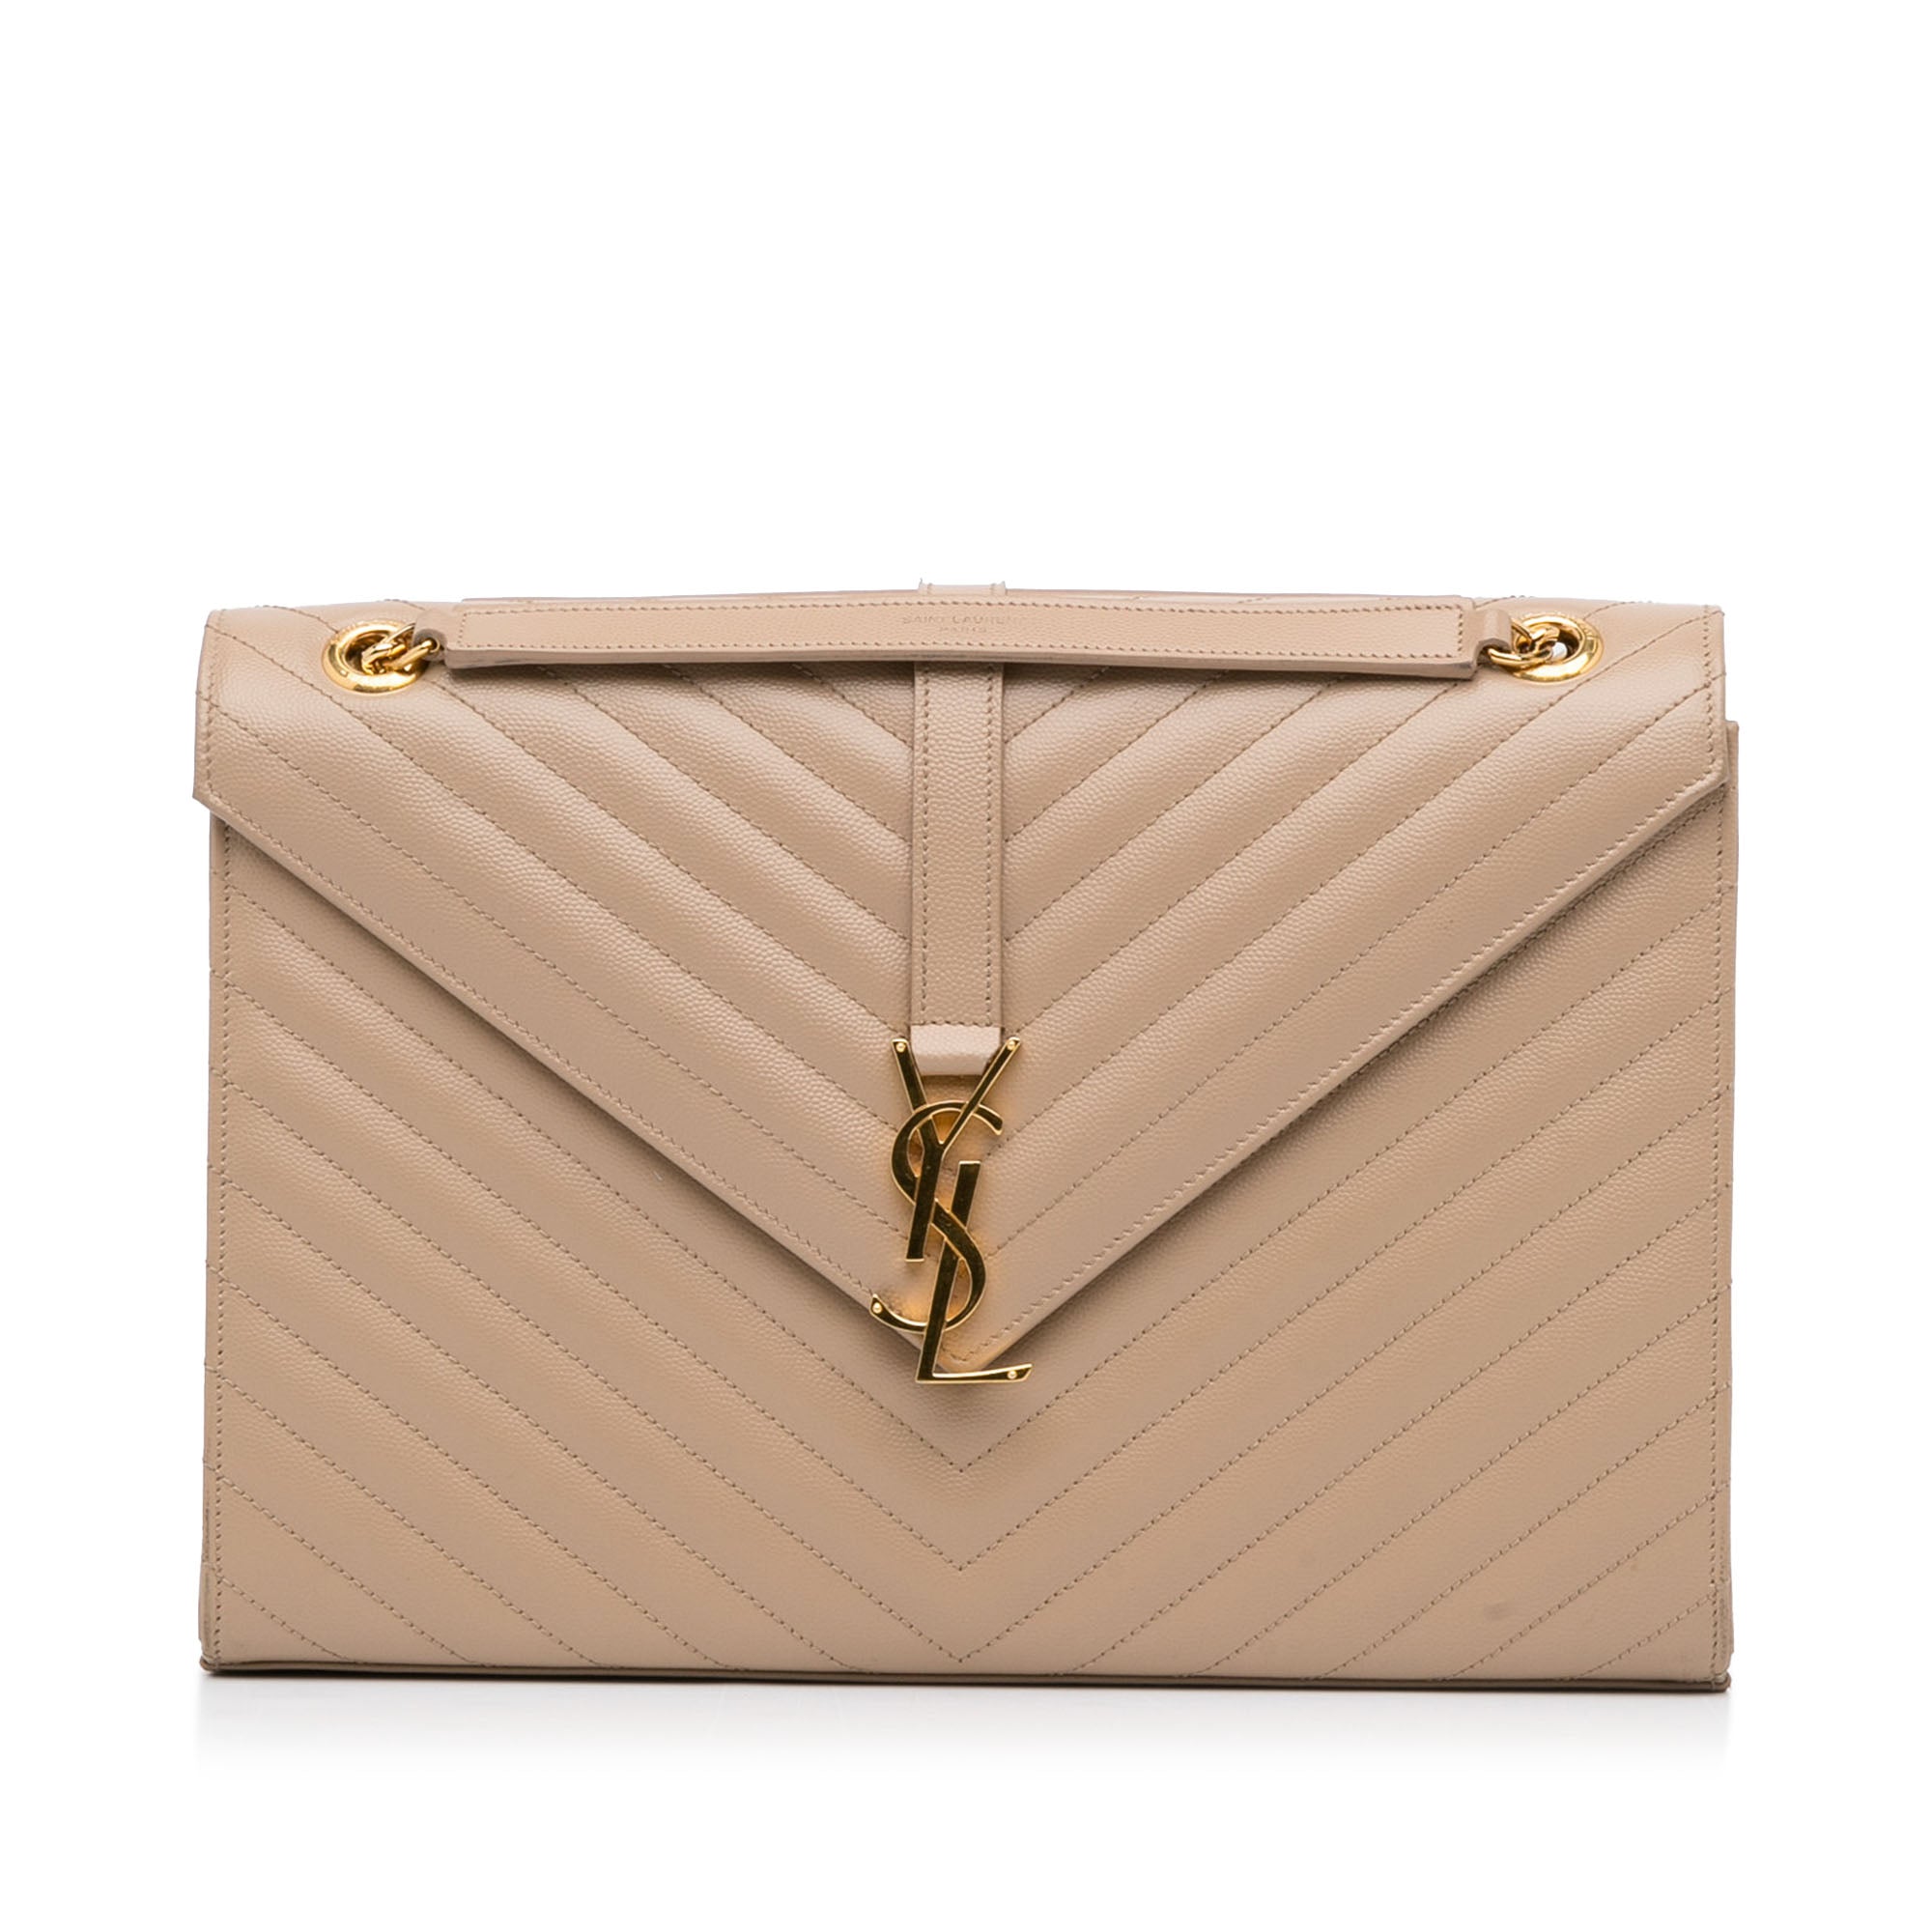 Yves Saint Laurent Envelope Large Beige Chevron Quilted Leather